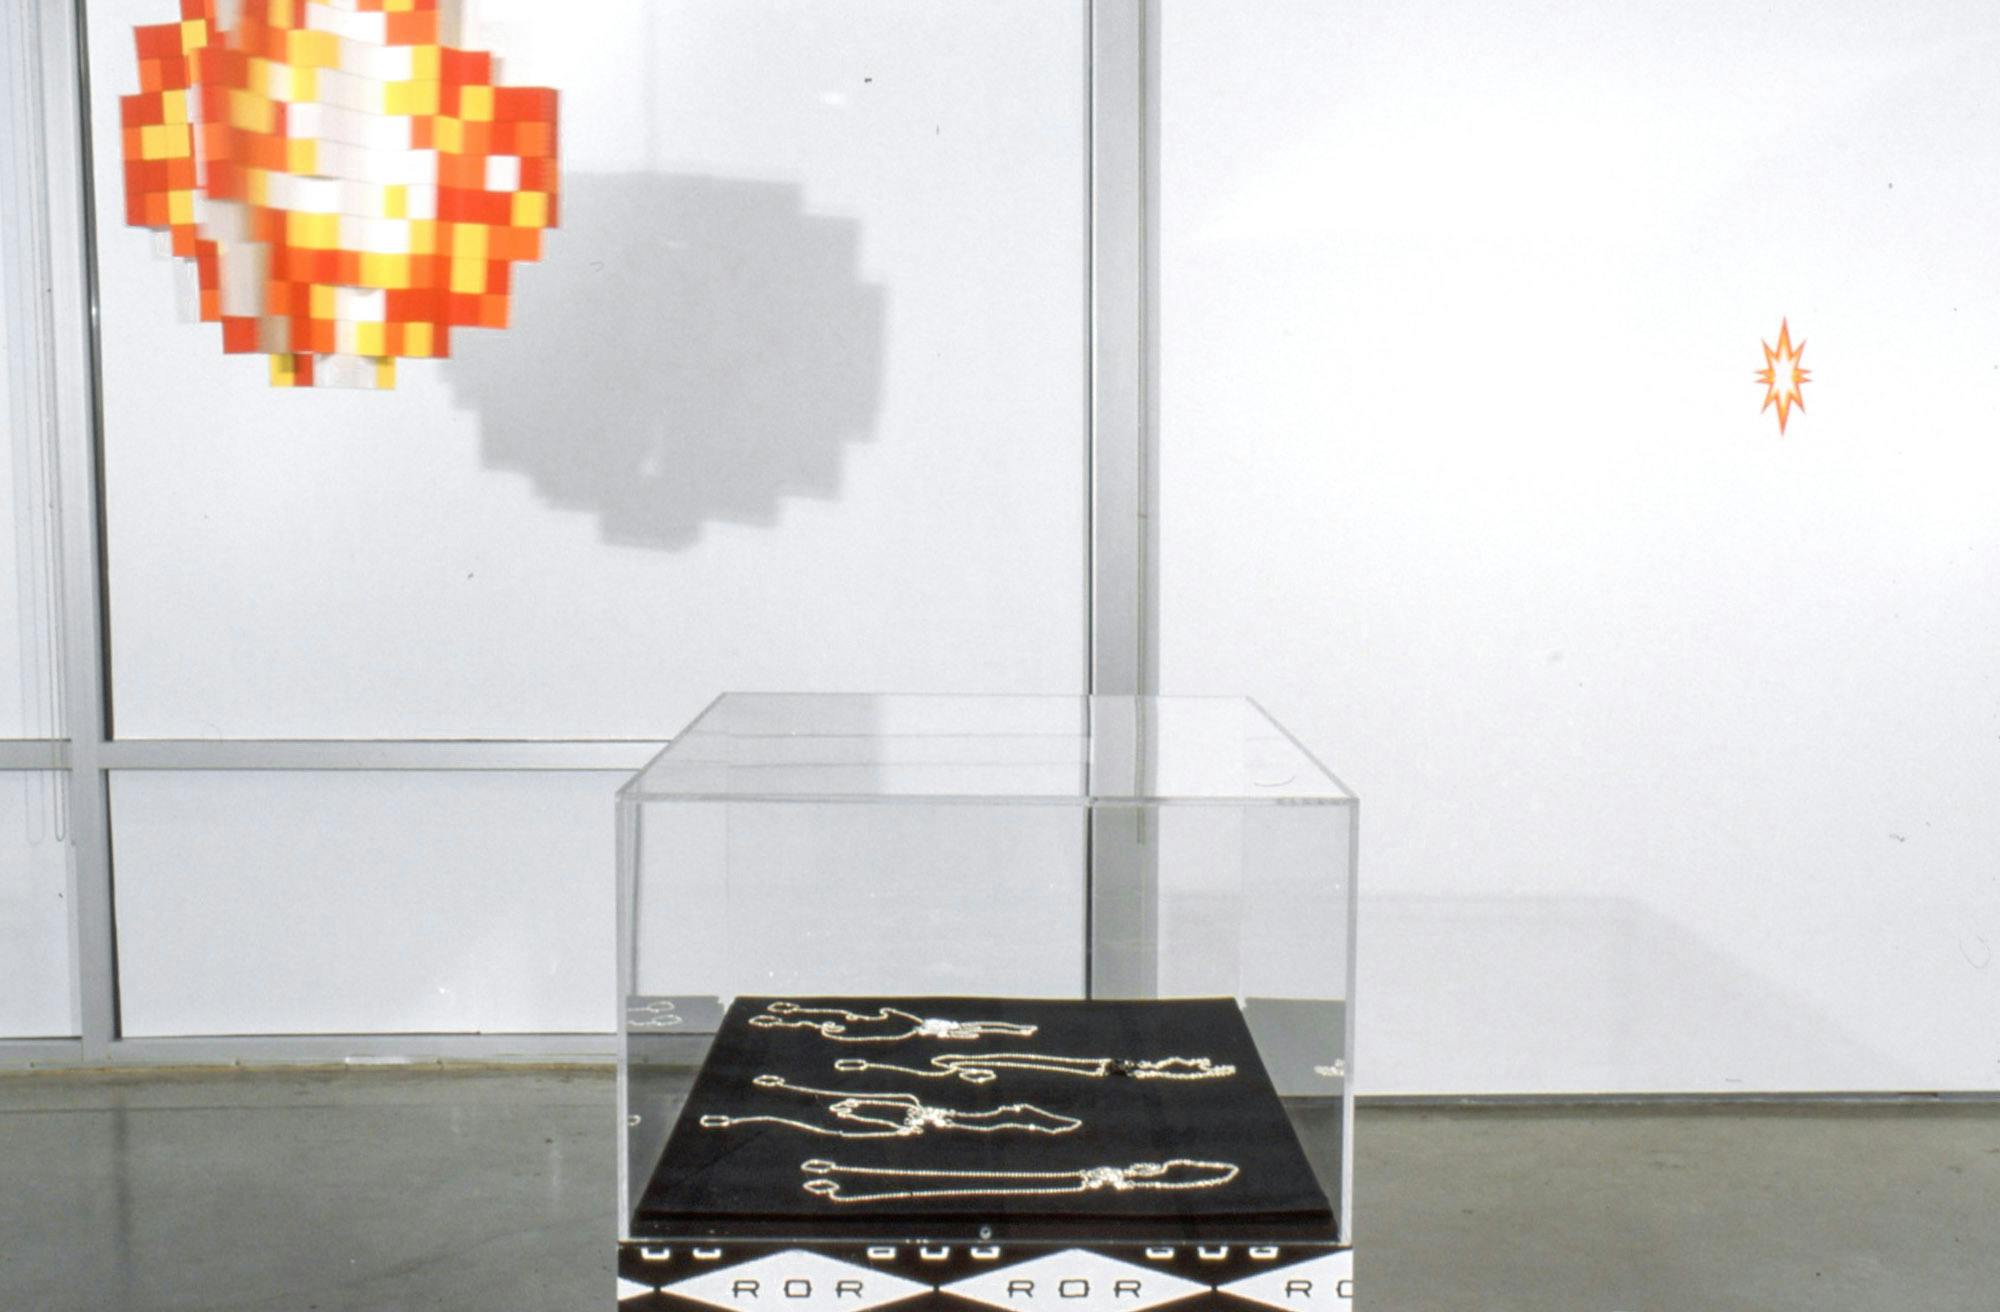 Installation image of works in a gallery. Four silver necklaces are placed flat on a piece of black fabric in a display case. A round sculpture that is probably made with orange, yellow and white Lego blocks is hanging from the ceiling.